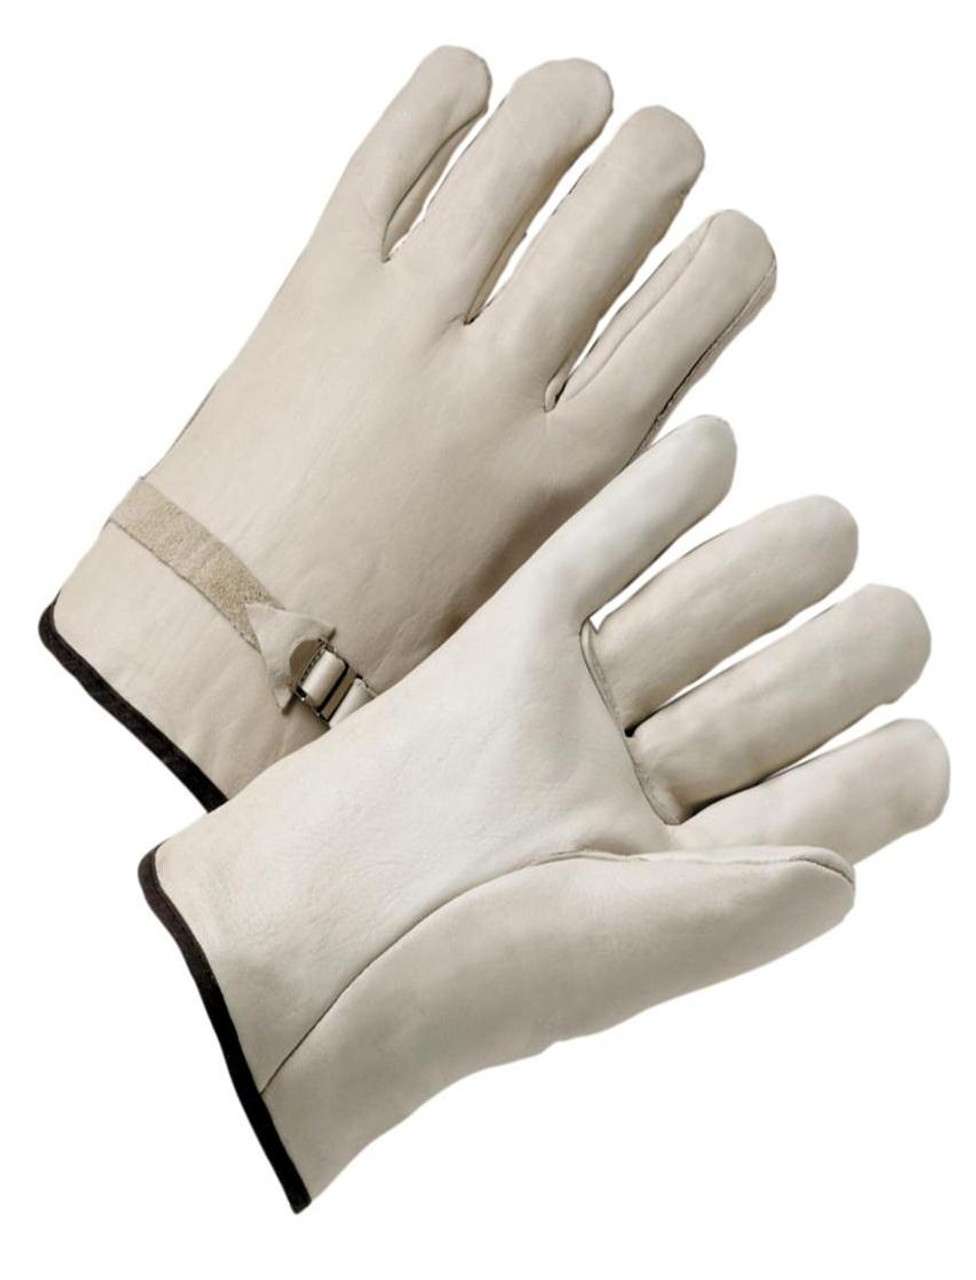 Liberty™ Safety Select Grain Cowhide W/Pull Strap Work Gloves